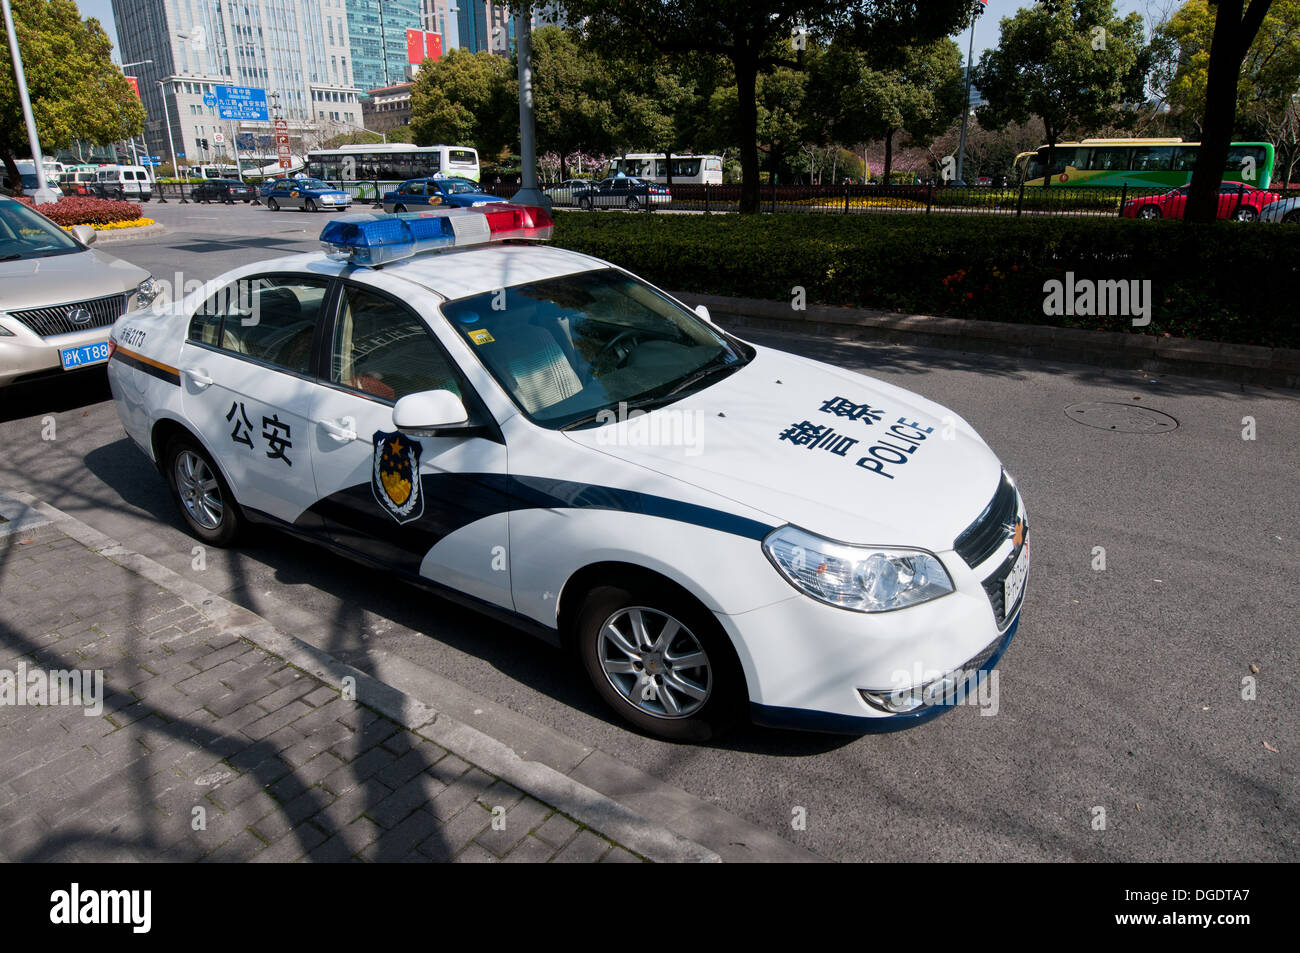 Police car on street in Shanghai, China Stock Photo